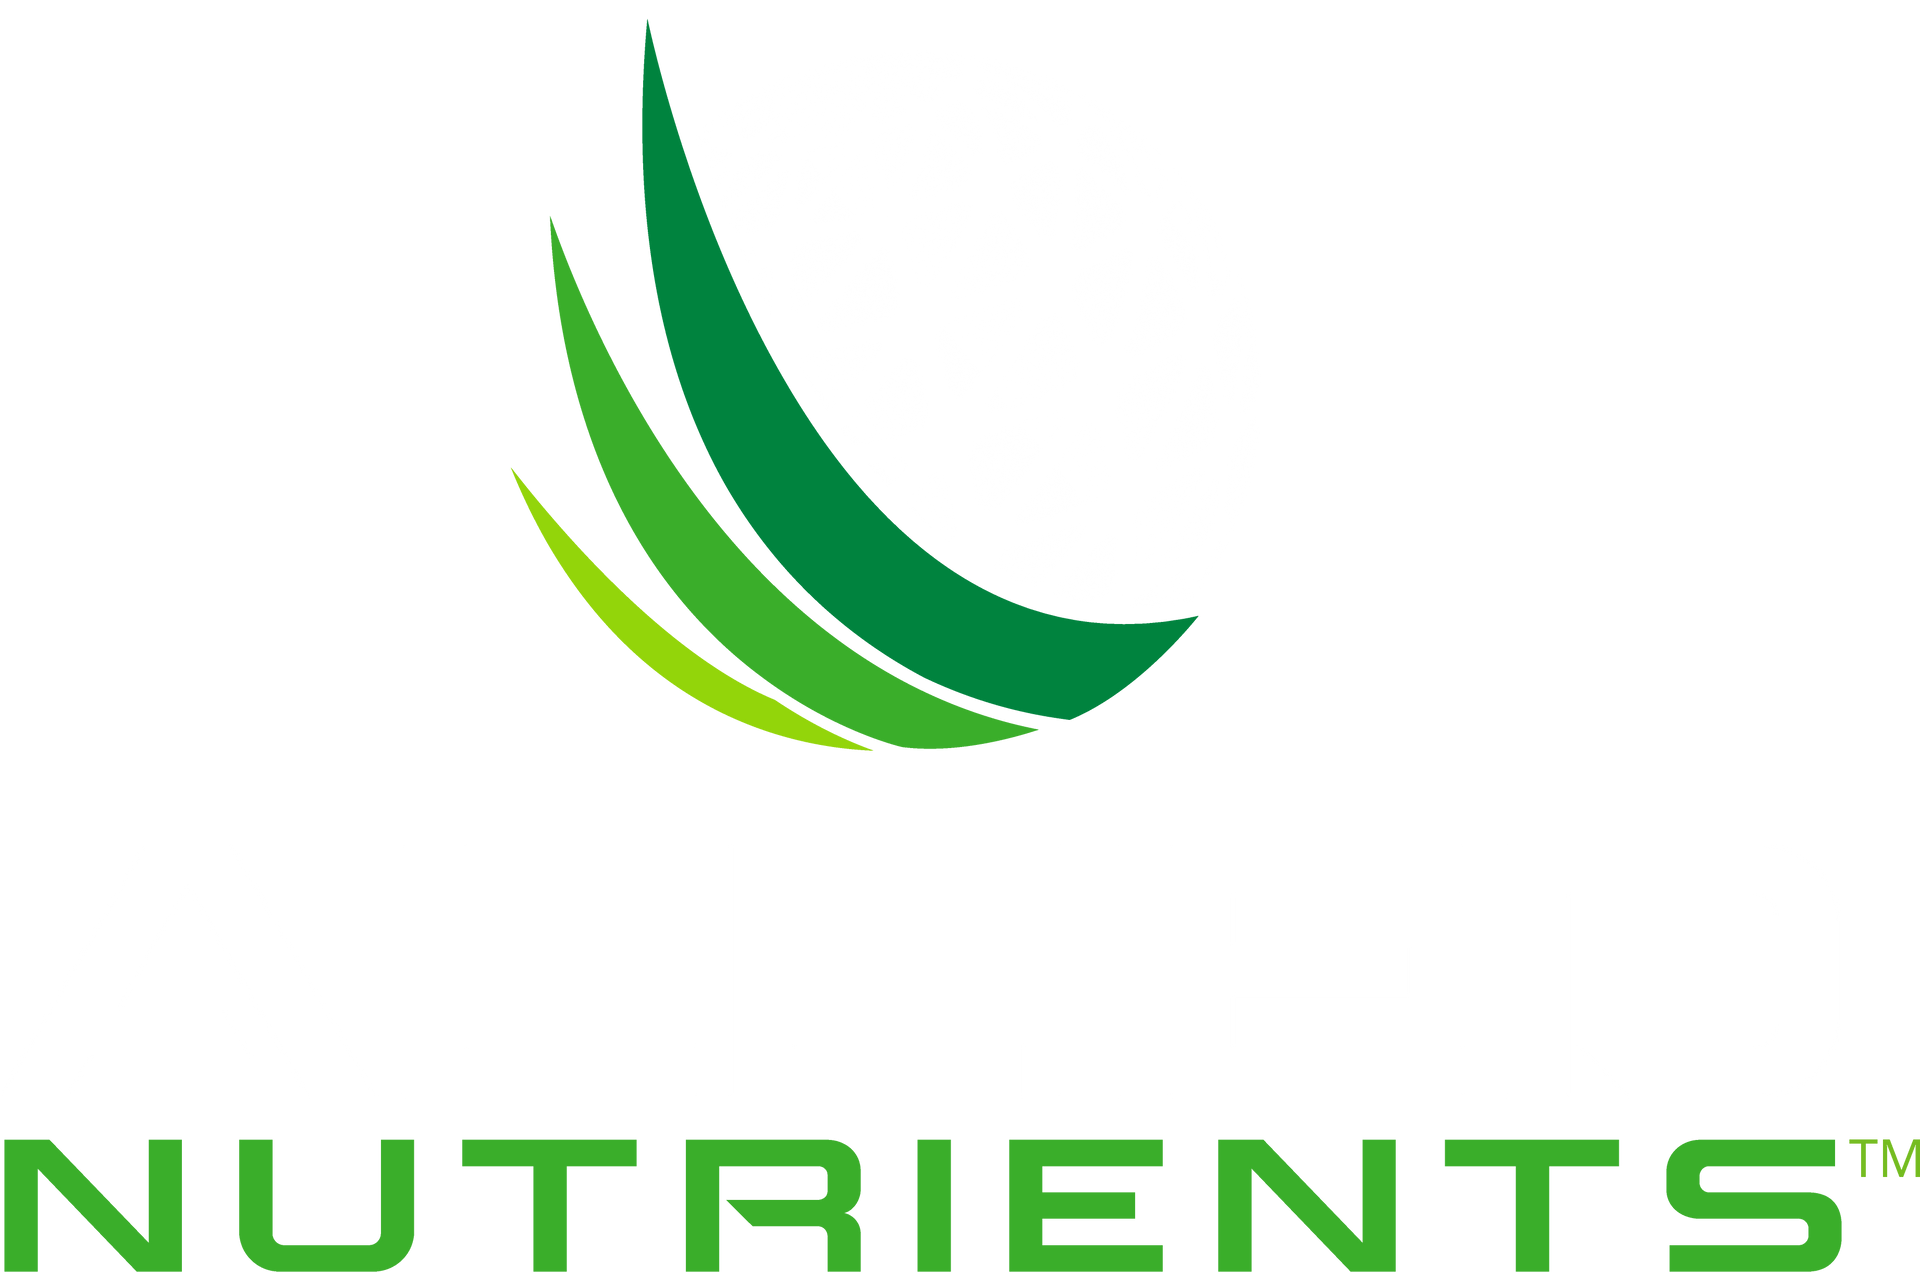 Allied nutrients logo featuring a gradient interwoven globe with 3 blades of grass extending from the left side. The words allied nutrients are below in white and green